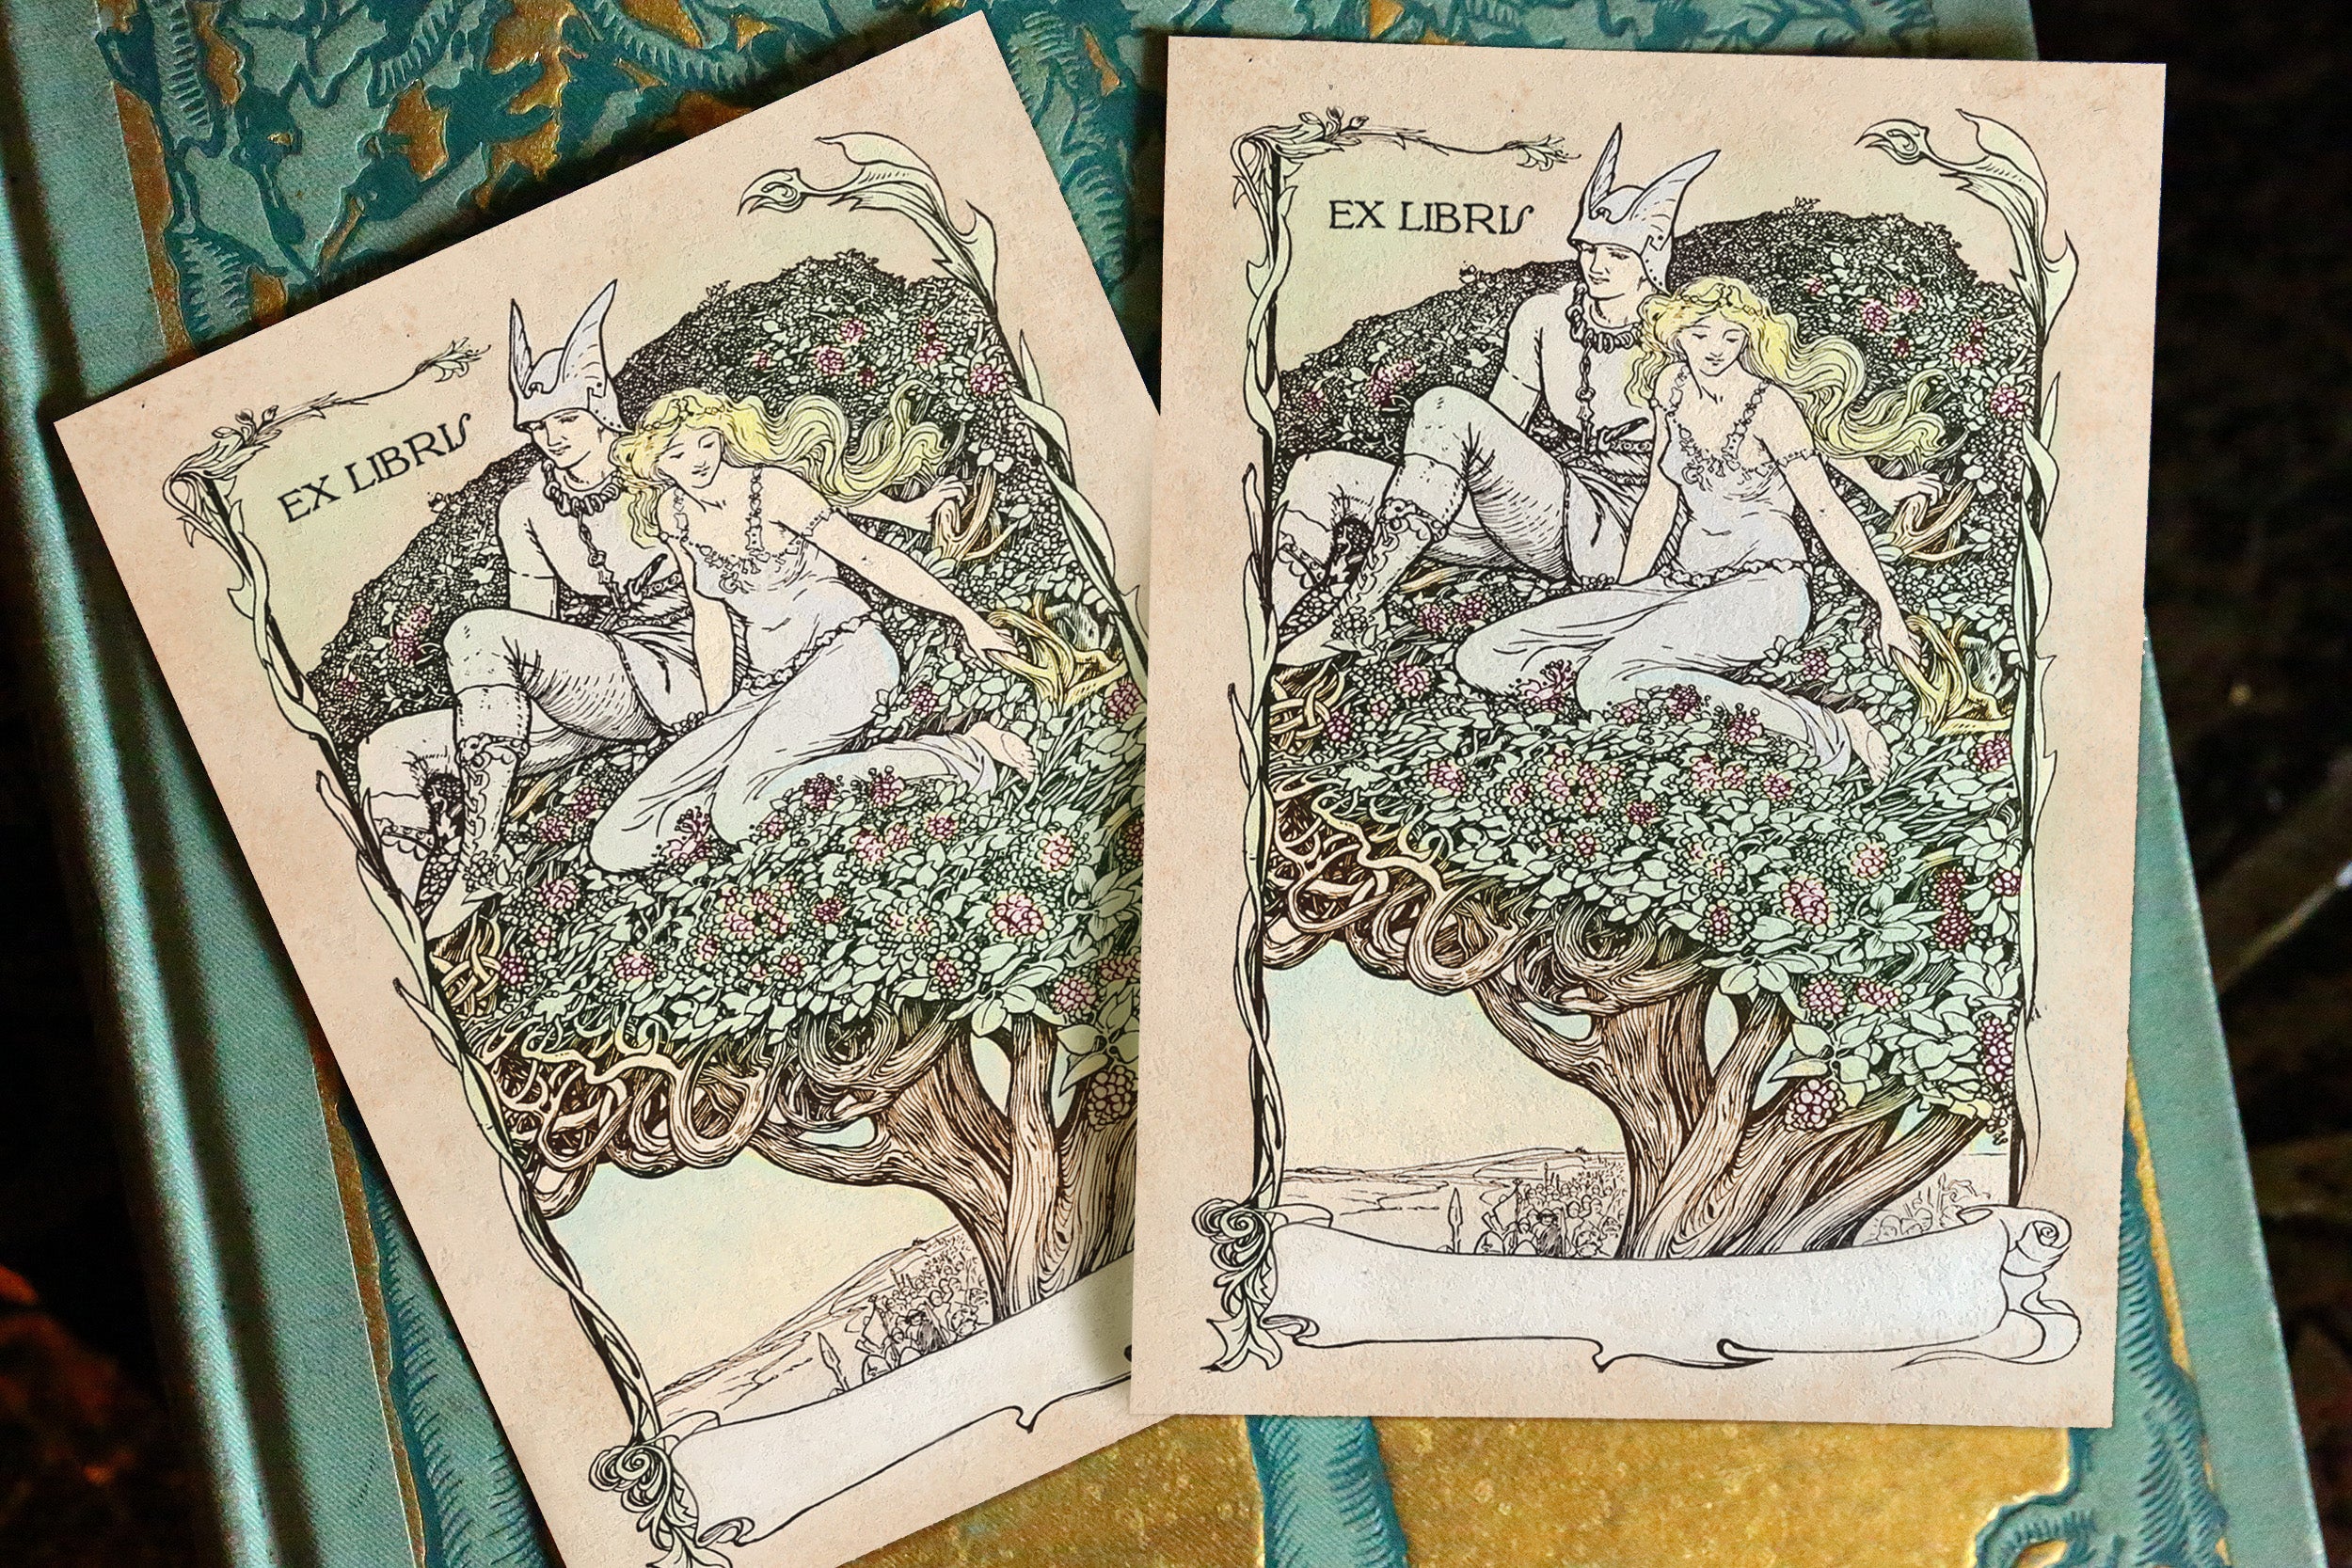 Fenian Cycle Irish Fairytale, Personalized Ex-Libris Bookplates, Crafted on Traditional Gummed Paper, 3in x 4in, Set of 30